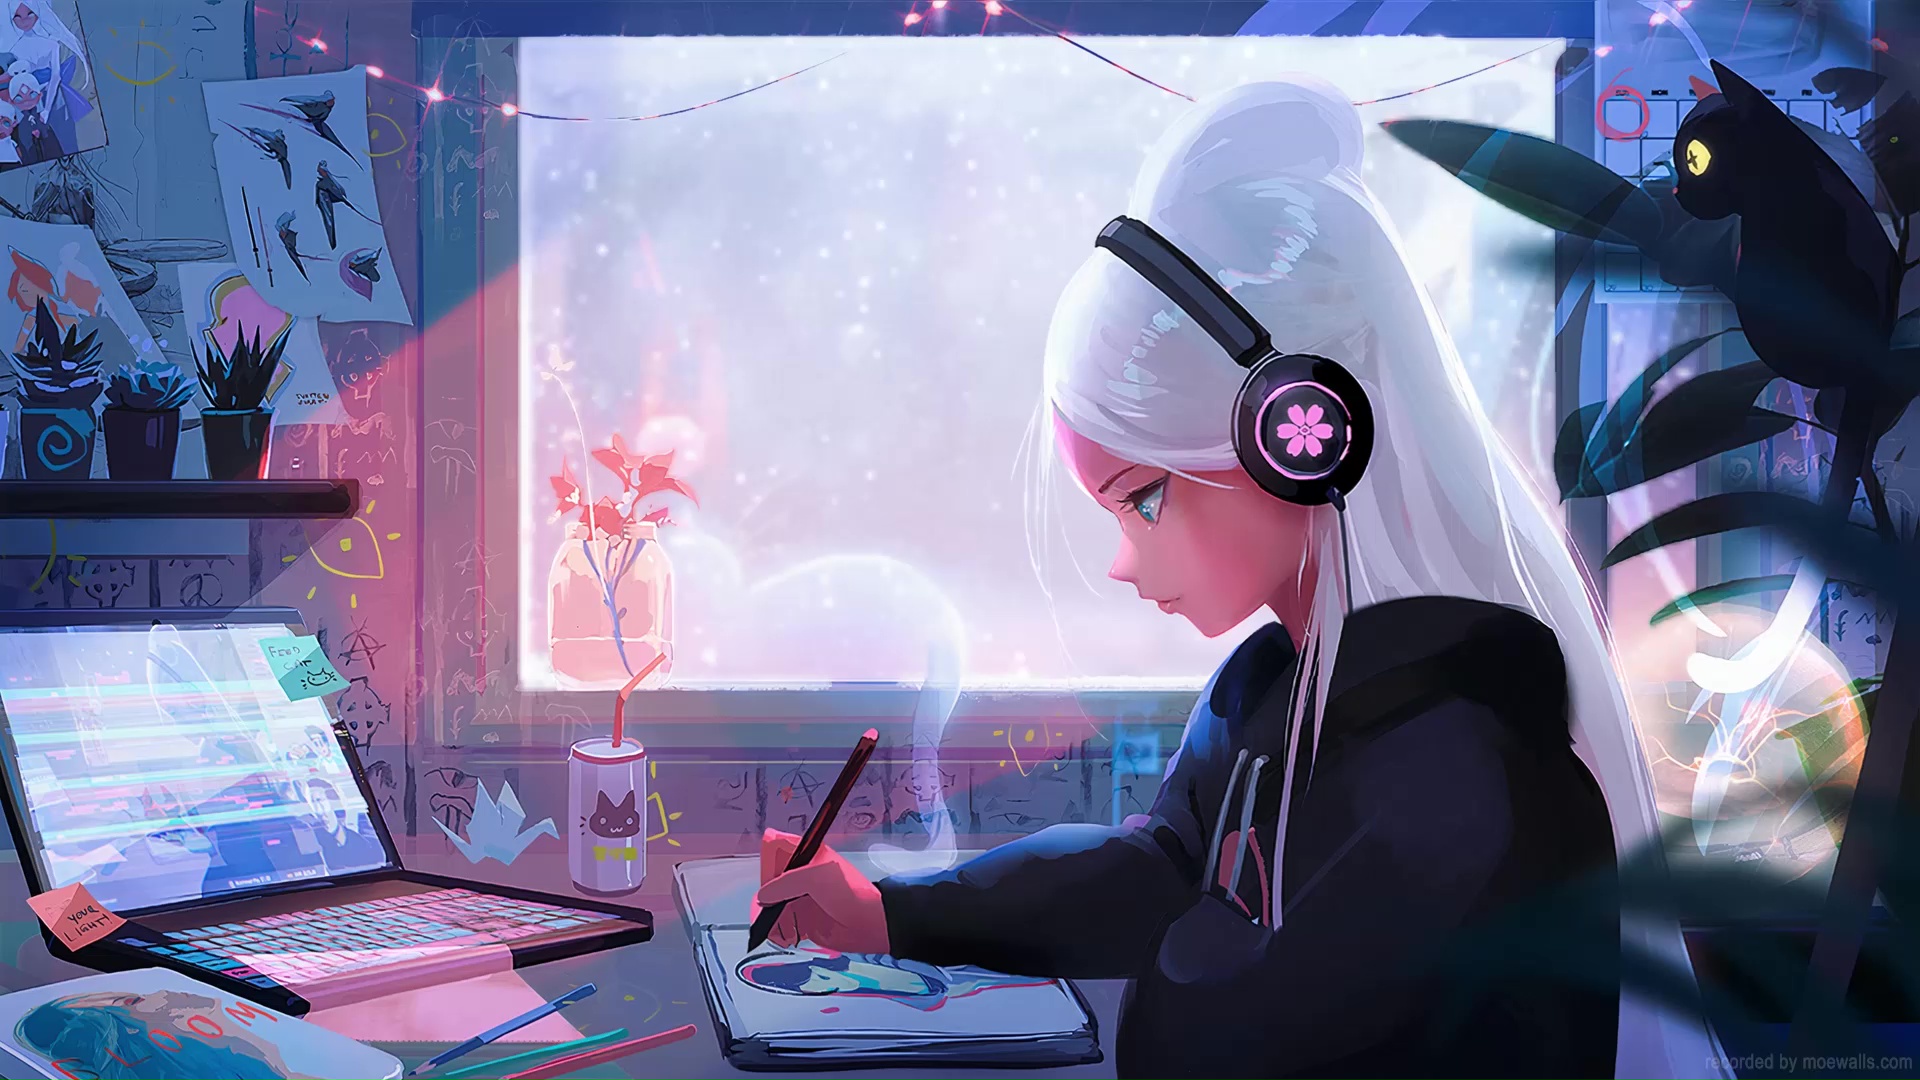 Anime Listening to Music Wallpapers - Top 35 Best Anime Listening to Music  Wallpapers Download